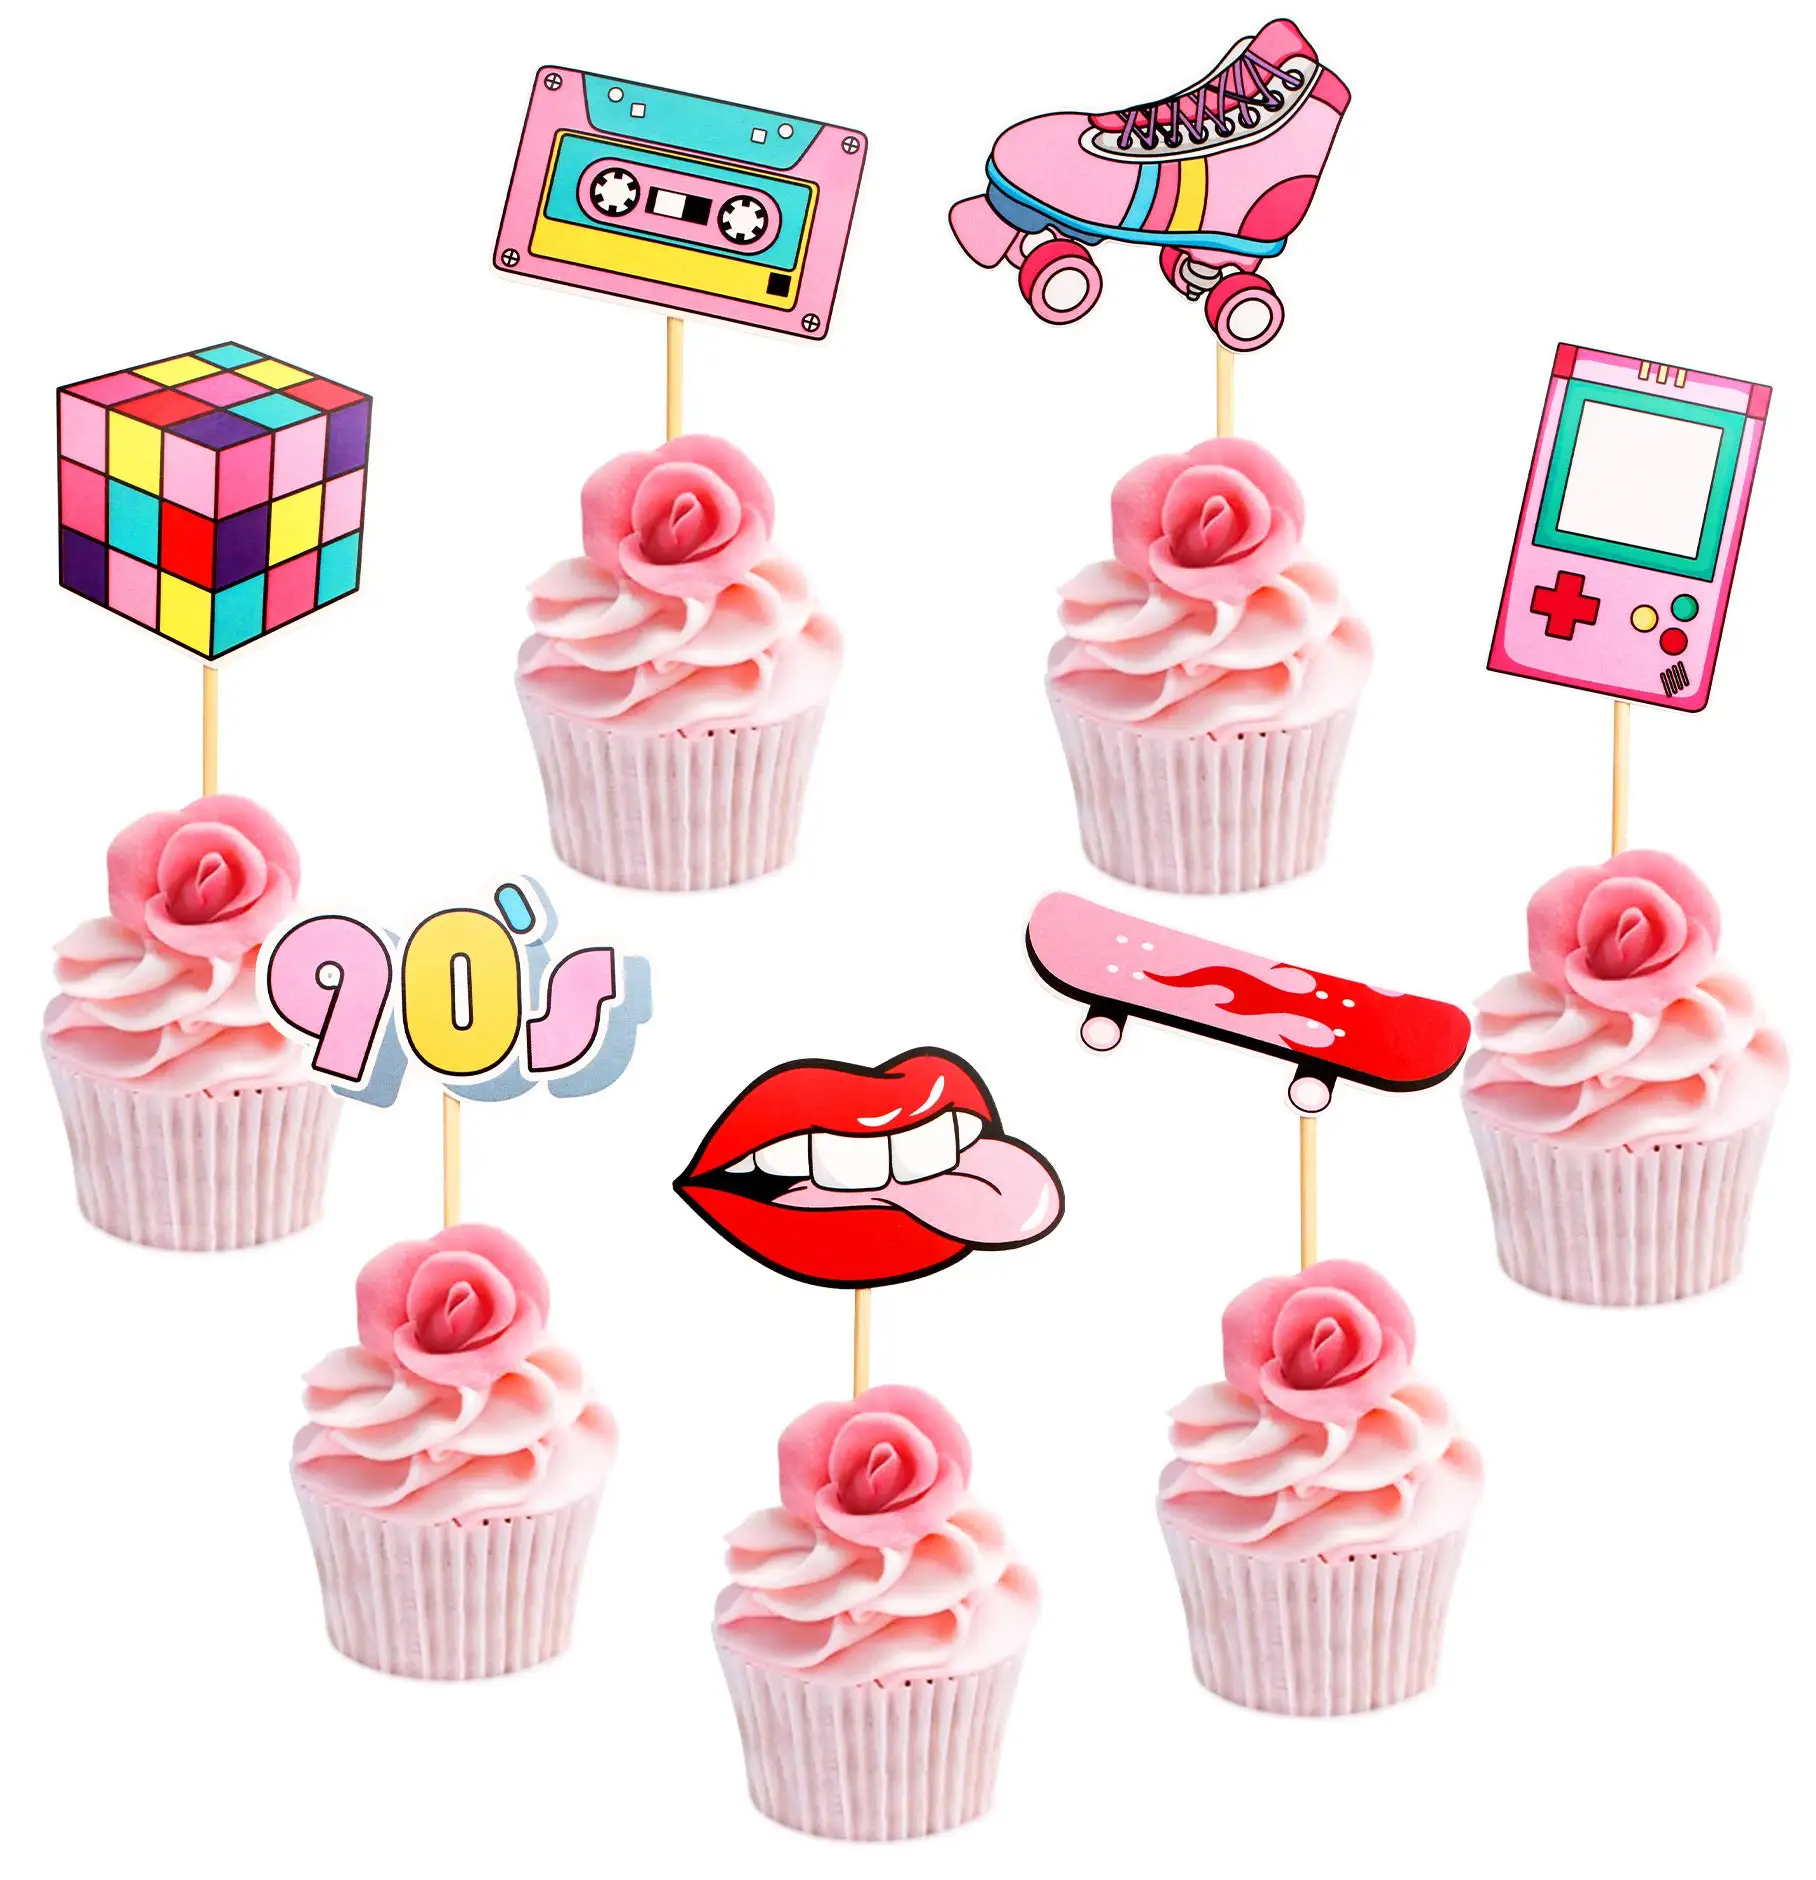 21Pcs 80s 90s Themed Cupcake Toppers Dessert Cupcake Toppers Birthday Supplies Throwback Party Favors Decorations 24pcs six princess theme baby shower cupcake toppers with wooden stick baby shower favors party supplies wedding decorations set